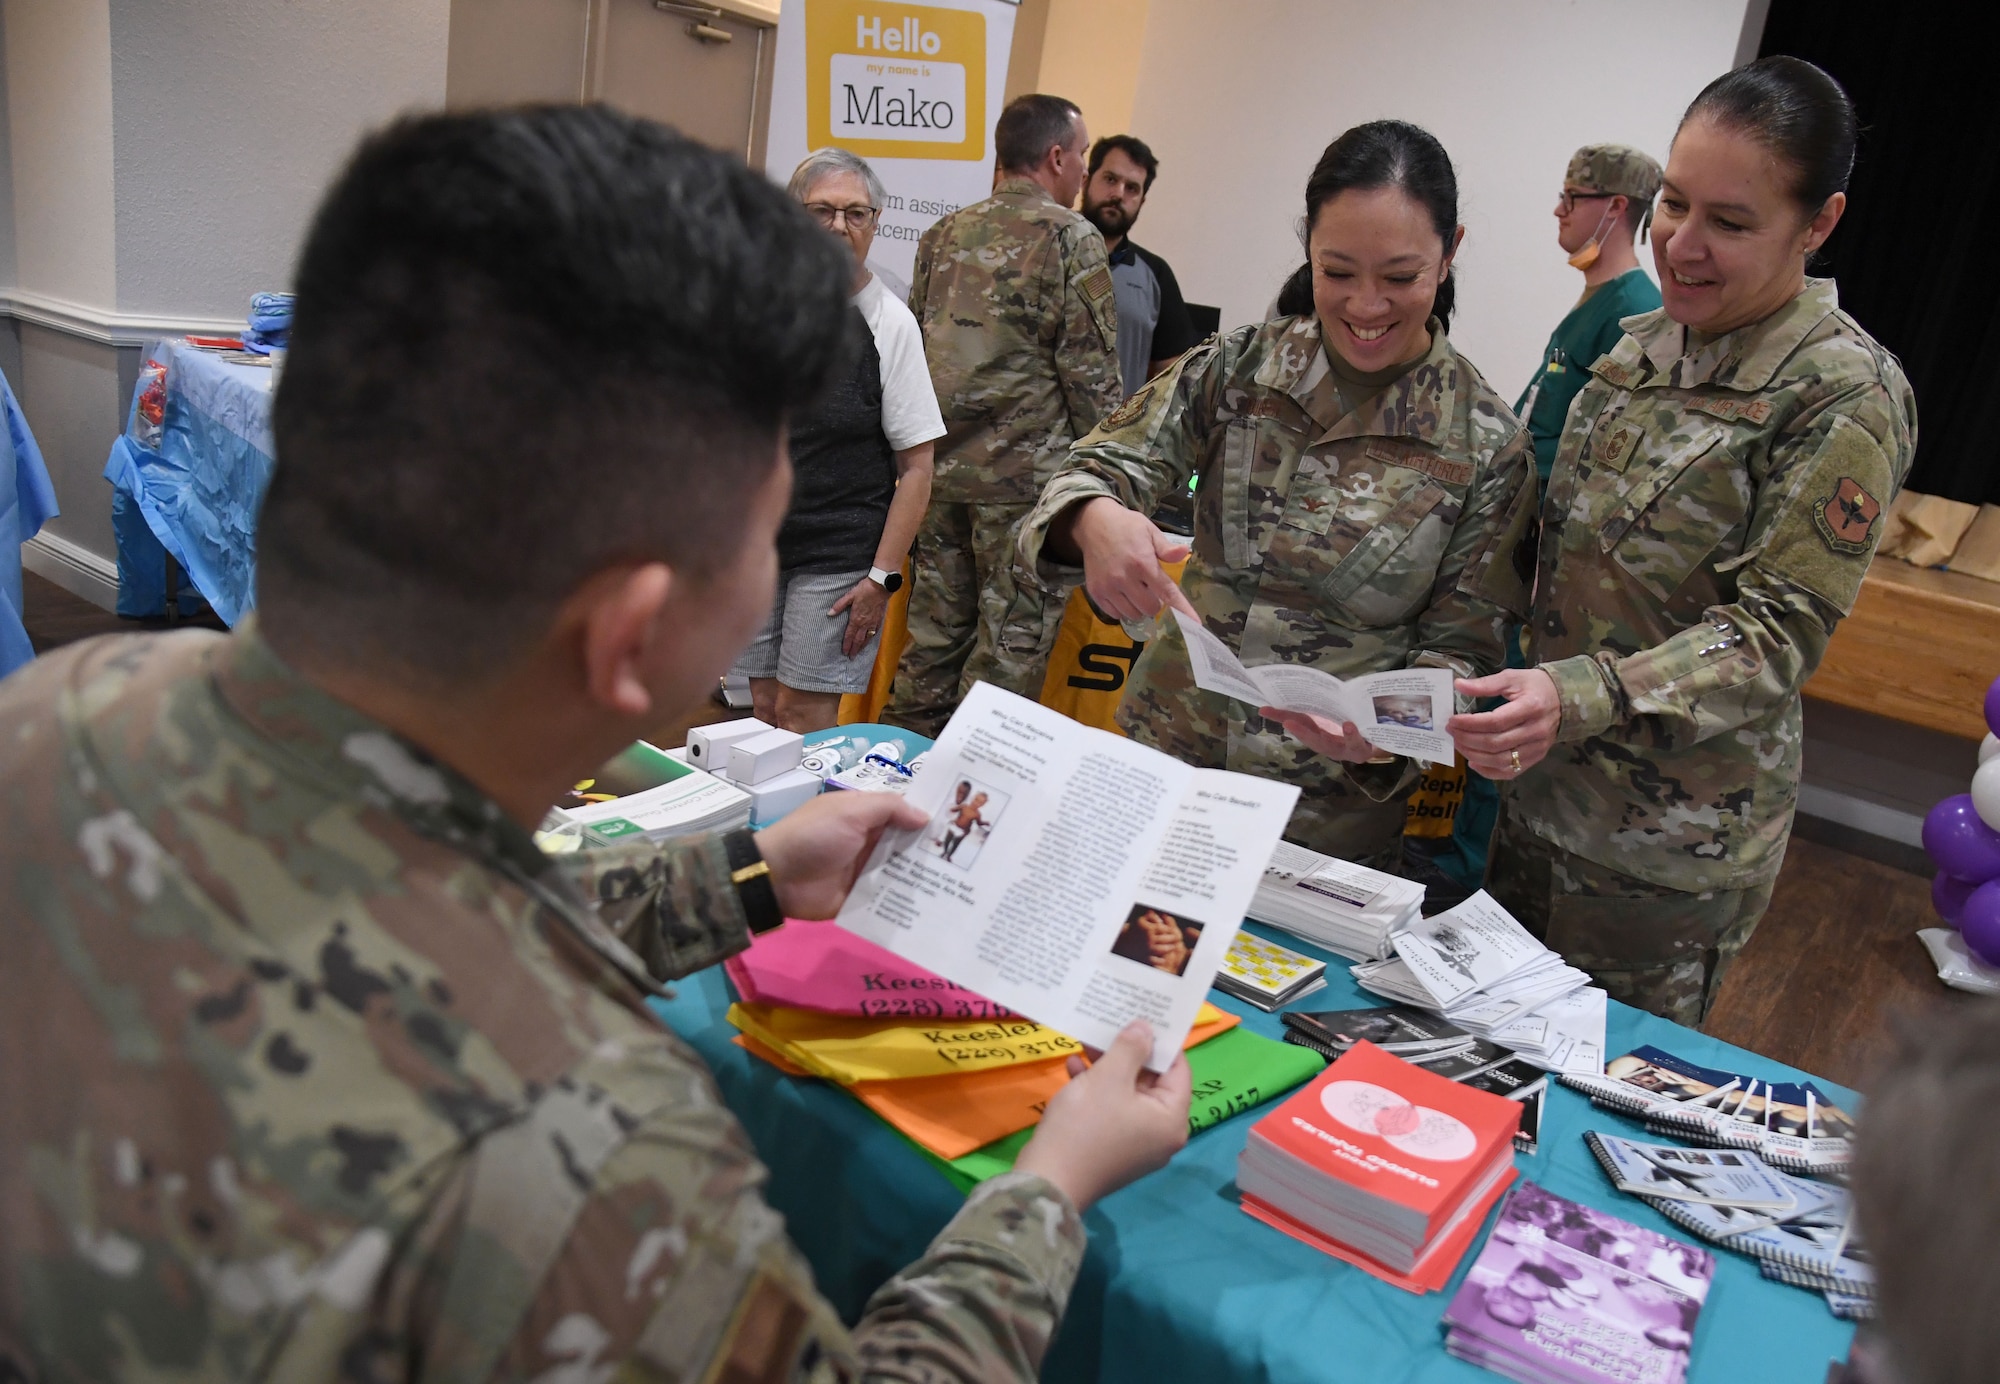 U.S. Air Force Tech. Sgt. Alex Chung, 81st Operational Medical Readiness Squadron mental health NCO in charge, provides mental health and family advocacy literature to Col. Lynne Bussie, 81st Medical Group deputy commander, and Chief Master Sgt. Paula Eischen, 81st MDG senior enlisted leader, during the 11th Annual 81st Medical Group Health Expo inside the Keesler Medical Center auditorium at Keesler Air Force Base, Mississippi, October 7, 2022. The 81st MDG hosted the walk-in event, which included information booths and scheduling appointments for multiple types of cancer and chronic diseases in honor of Breast Cancer Awareness Month. (U.S. Air Force photo by Kemberly Groue)